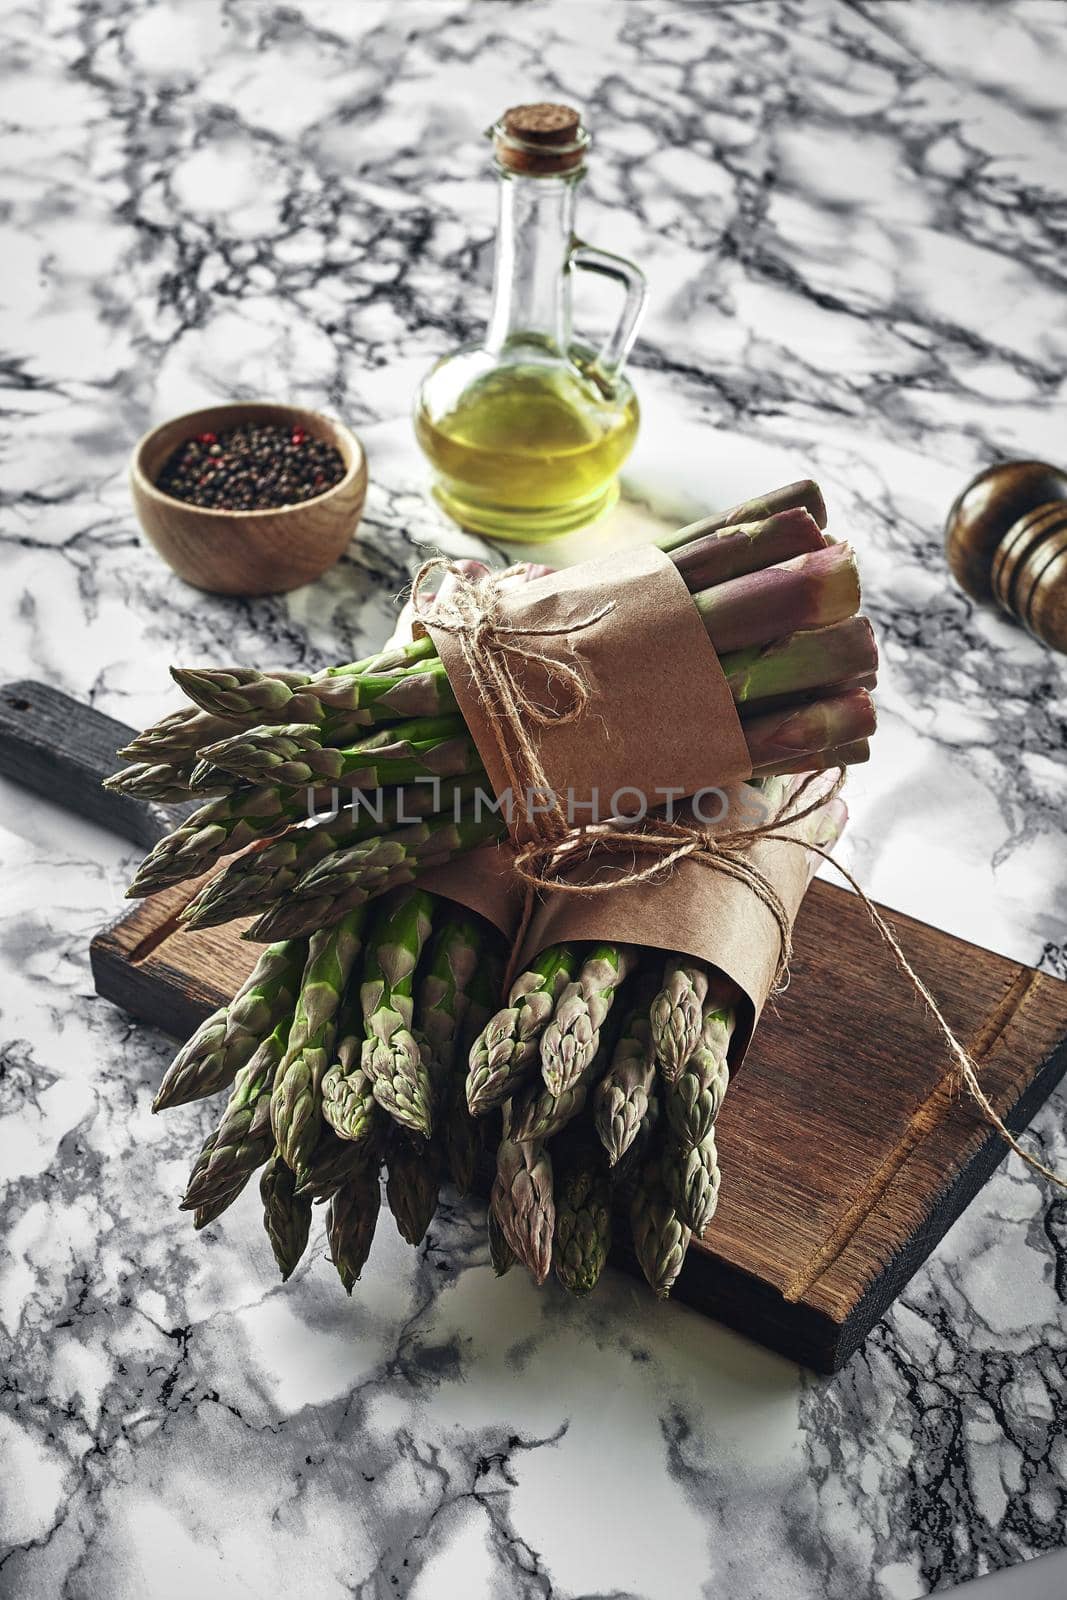 Bunch of an edible, fresh stems of asparagus on a wooden board, marble background. Green vegetables with olive oil and seasonings, top view. Healthy eating. Spring harvest, agricultural farming concept.